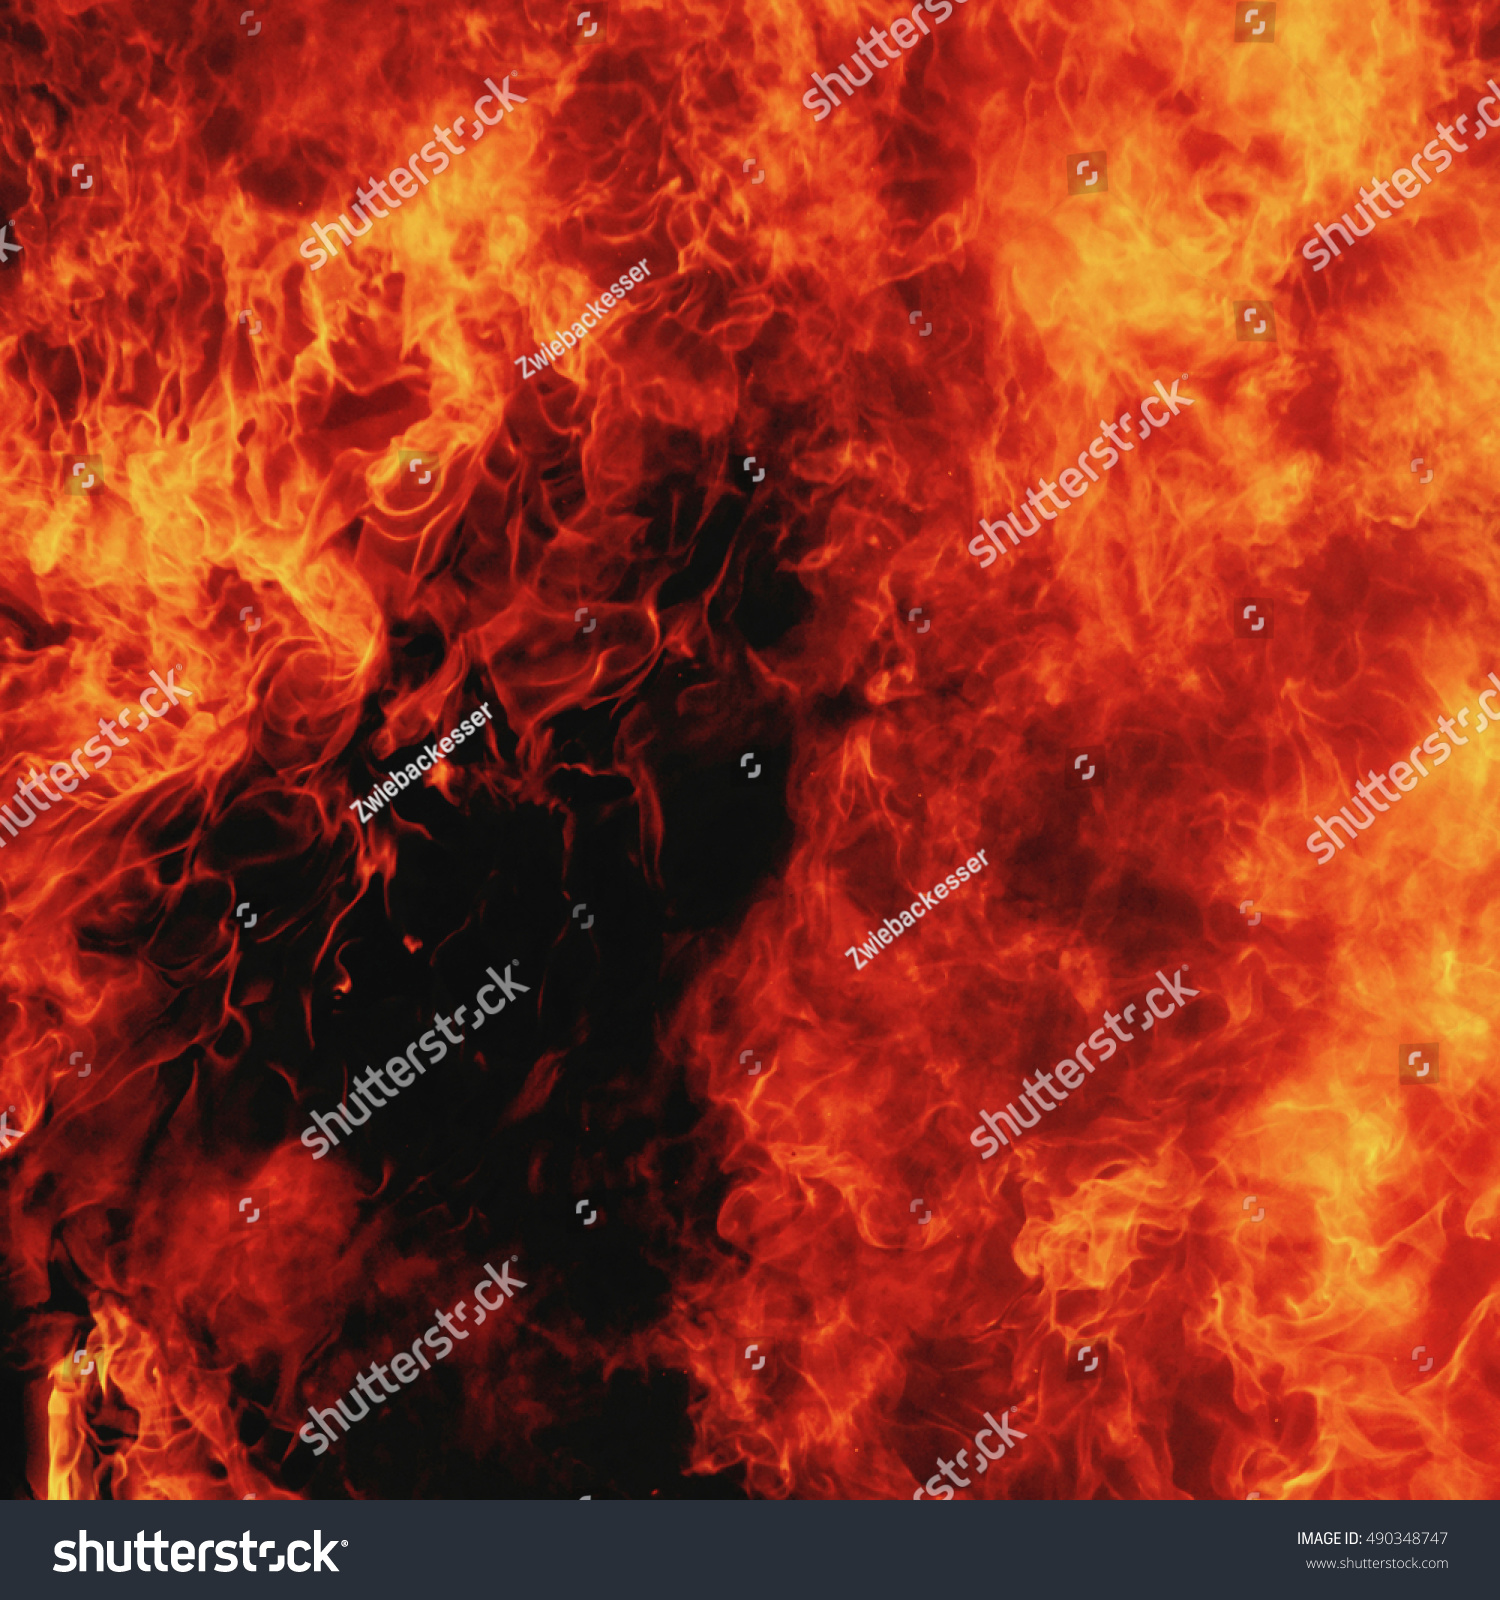 background of fire as a symbol of hell and eternal torment #490348747